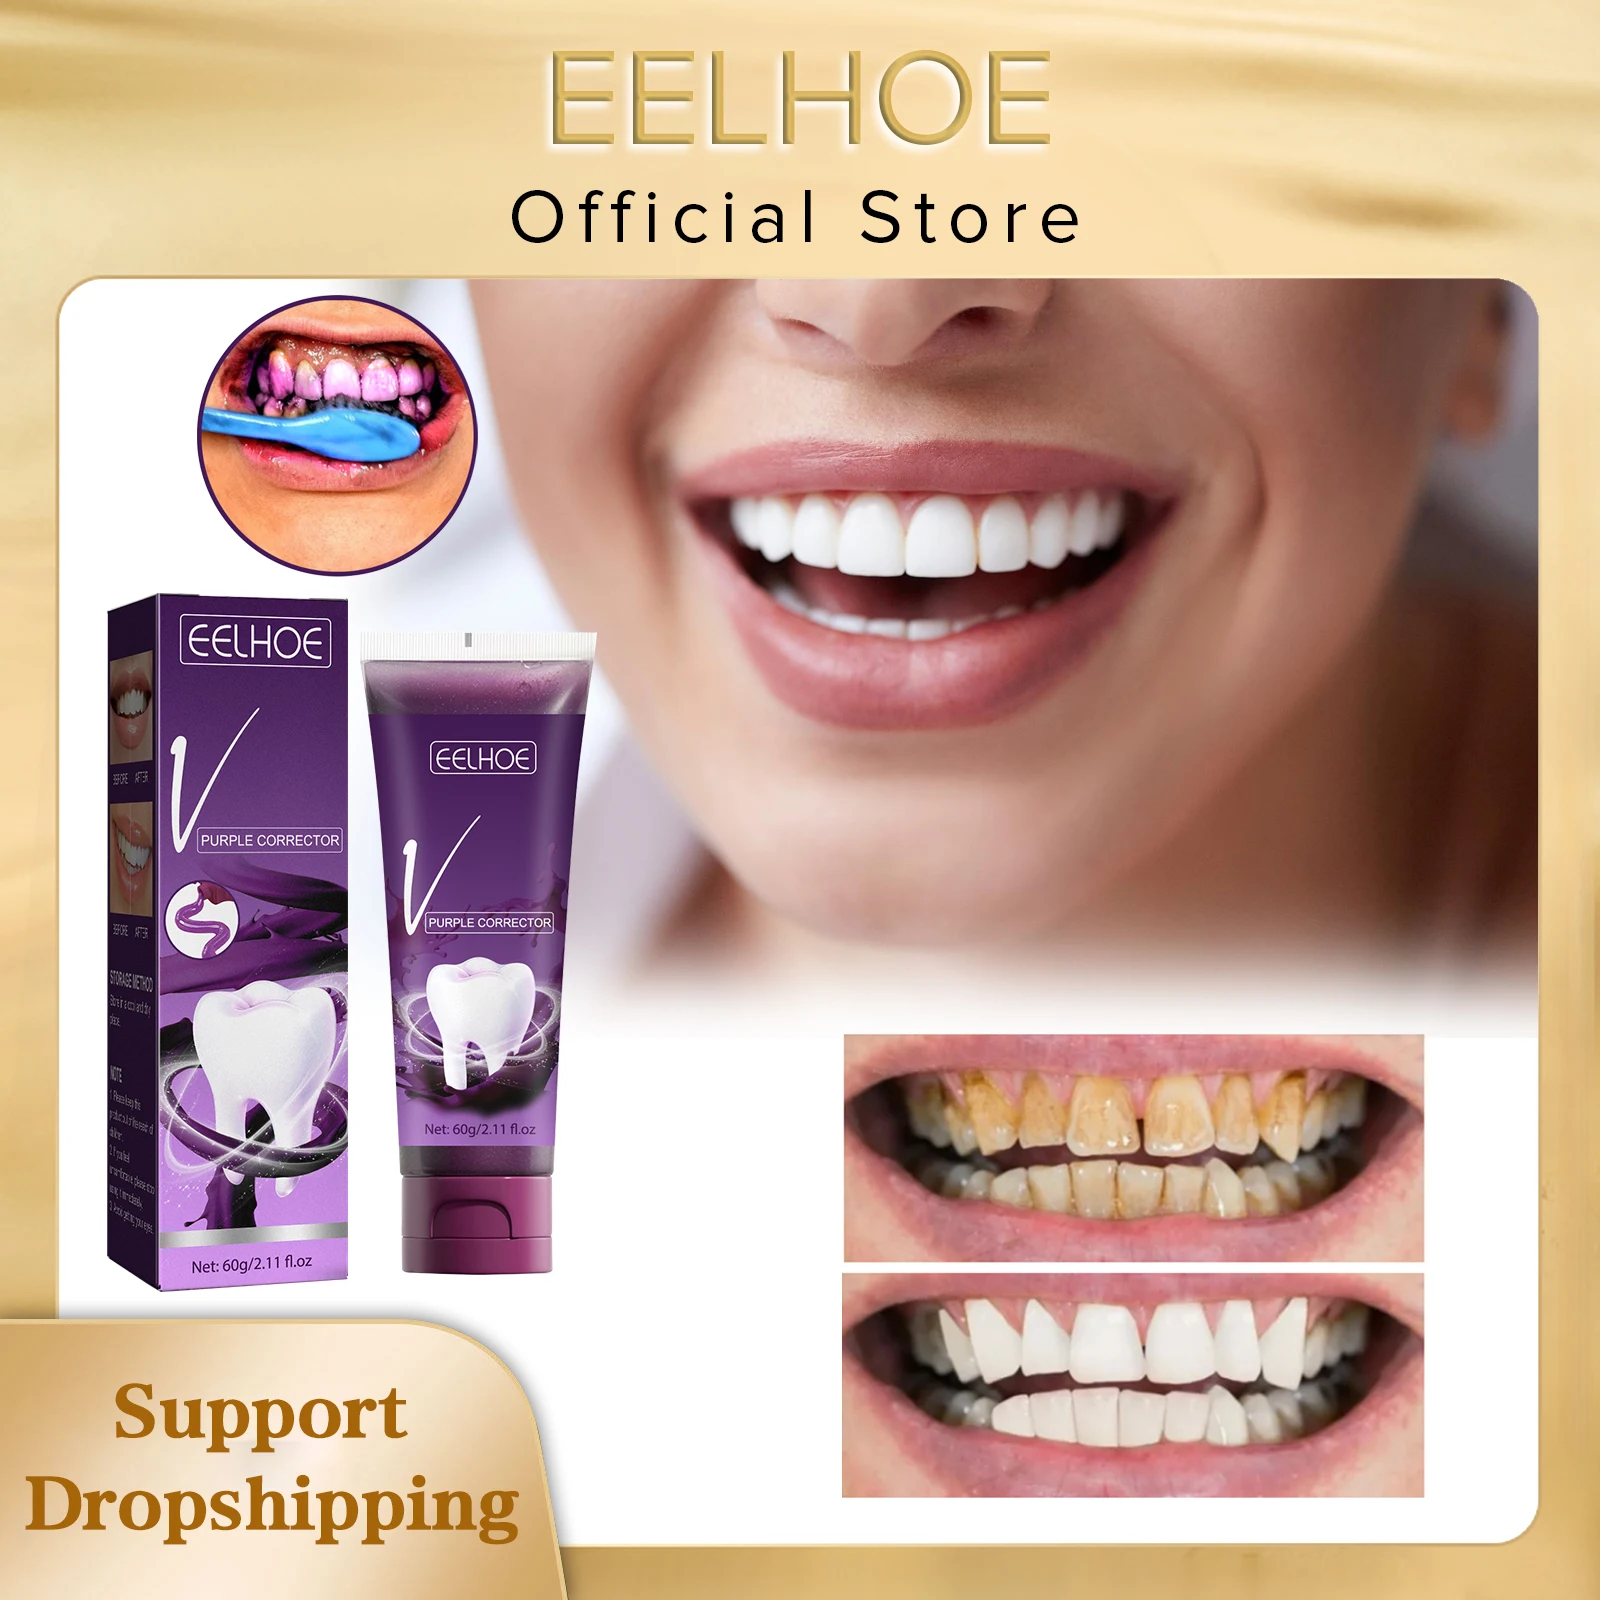 

EELHOE Toothpaste Whitening Teeth Removes Coffee Smoke Stains Fresh Breath Oral Hygiene Care Toothpaste Fast and Free Shipping